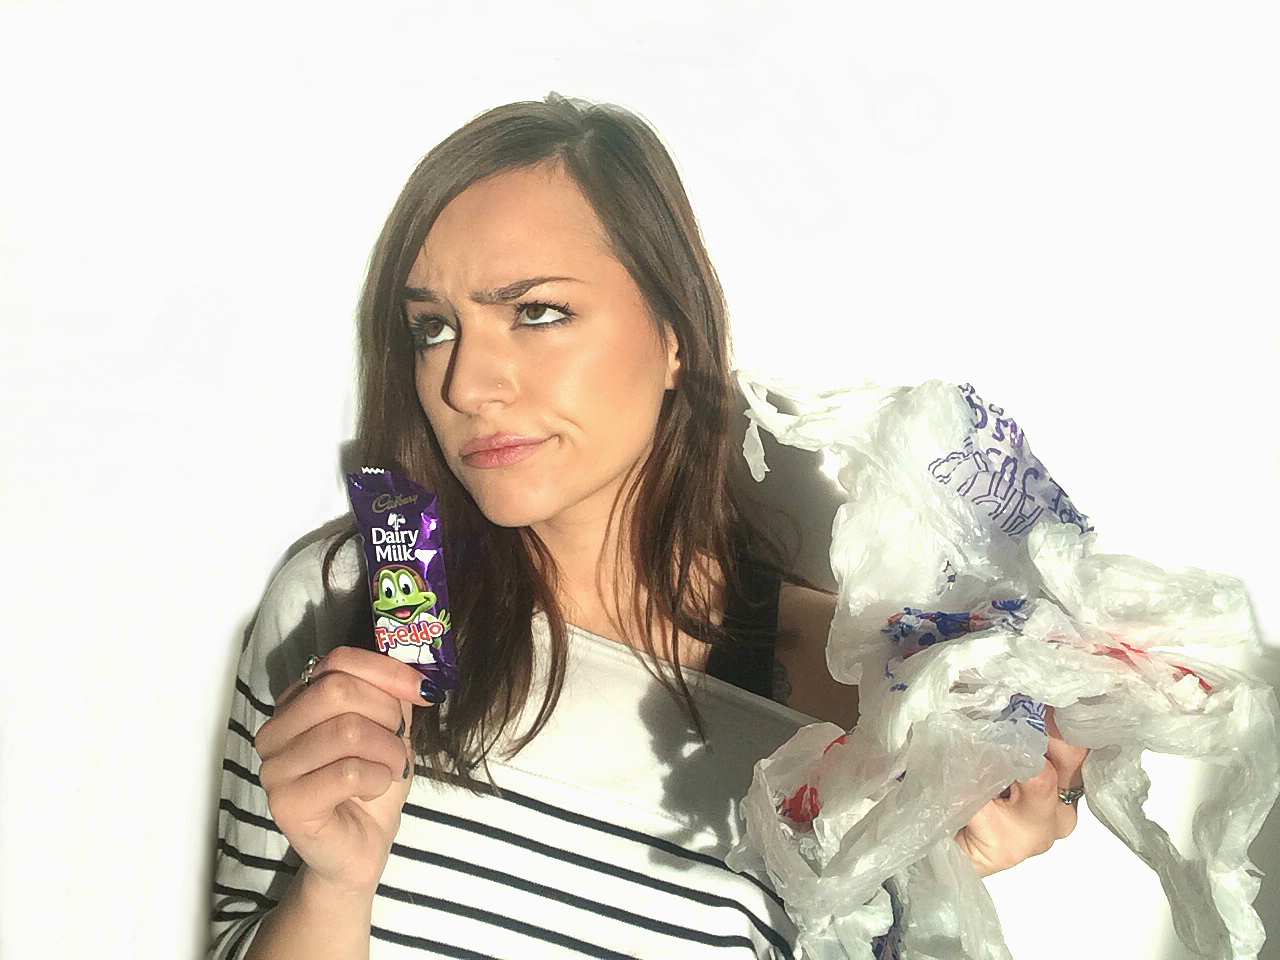 Dani D'silvez from Leafeco holding a Freddo chocolate bar and plastic bags in the other. Explaining that we are treating the 5p plastic bag charge like how we did with the increase in Freddos.